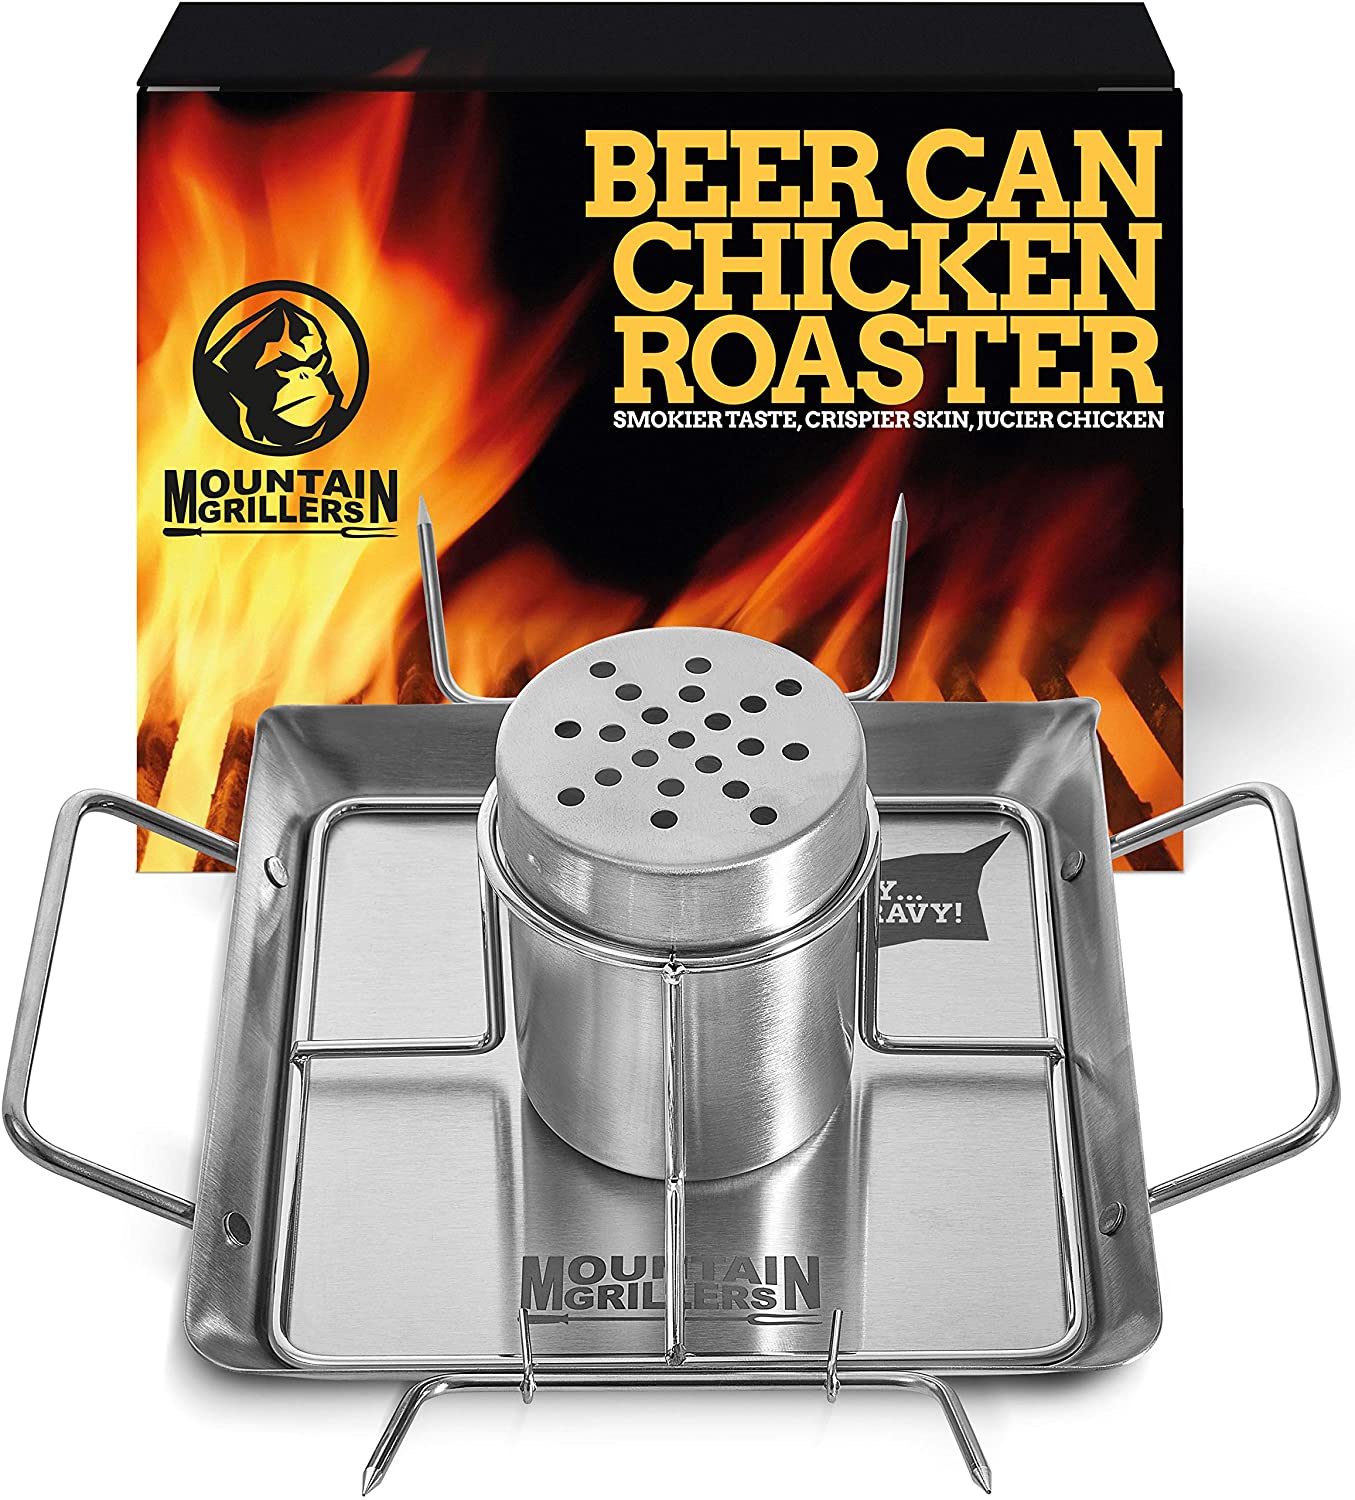 Mountain Grillers Drip Tray Flavor-Full Beer Can Chicken Holder